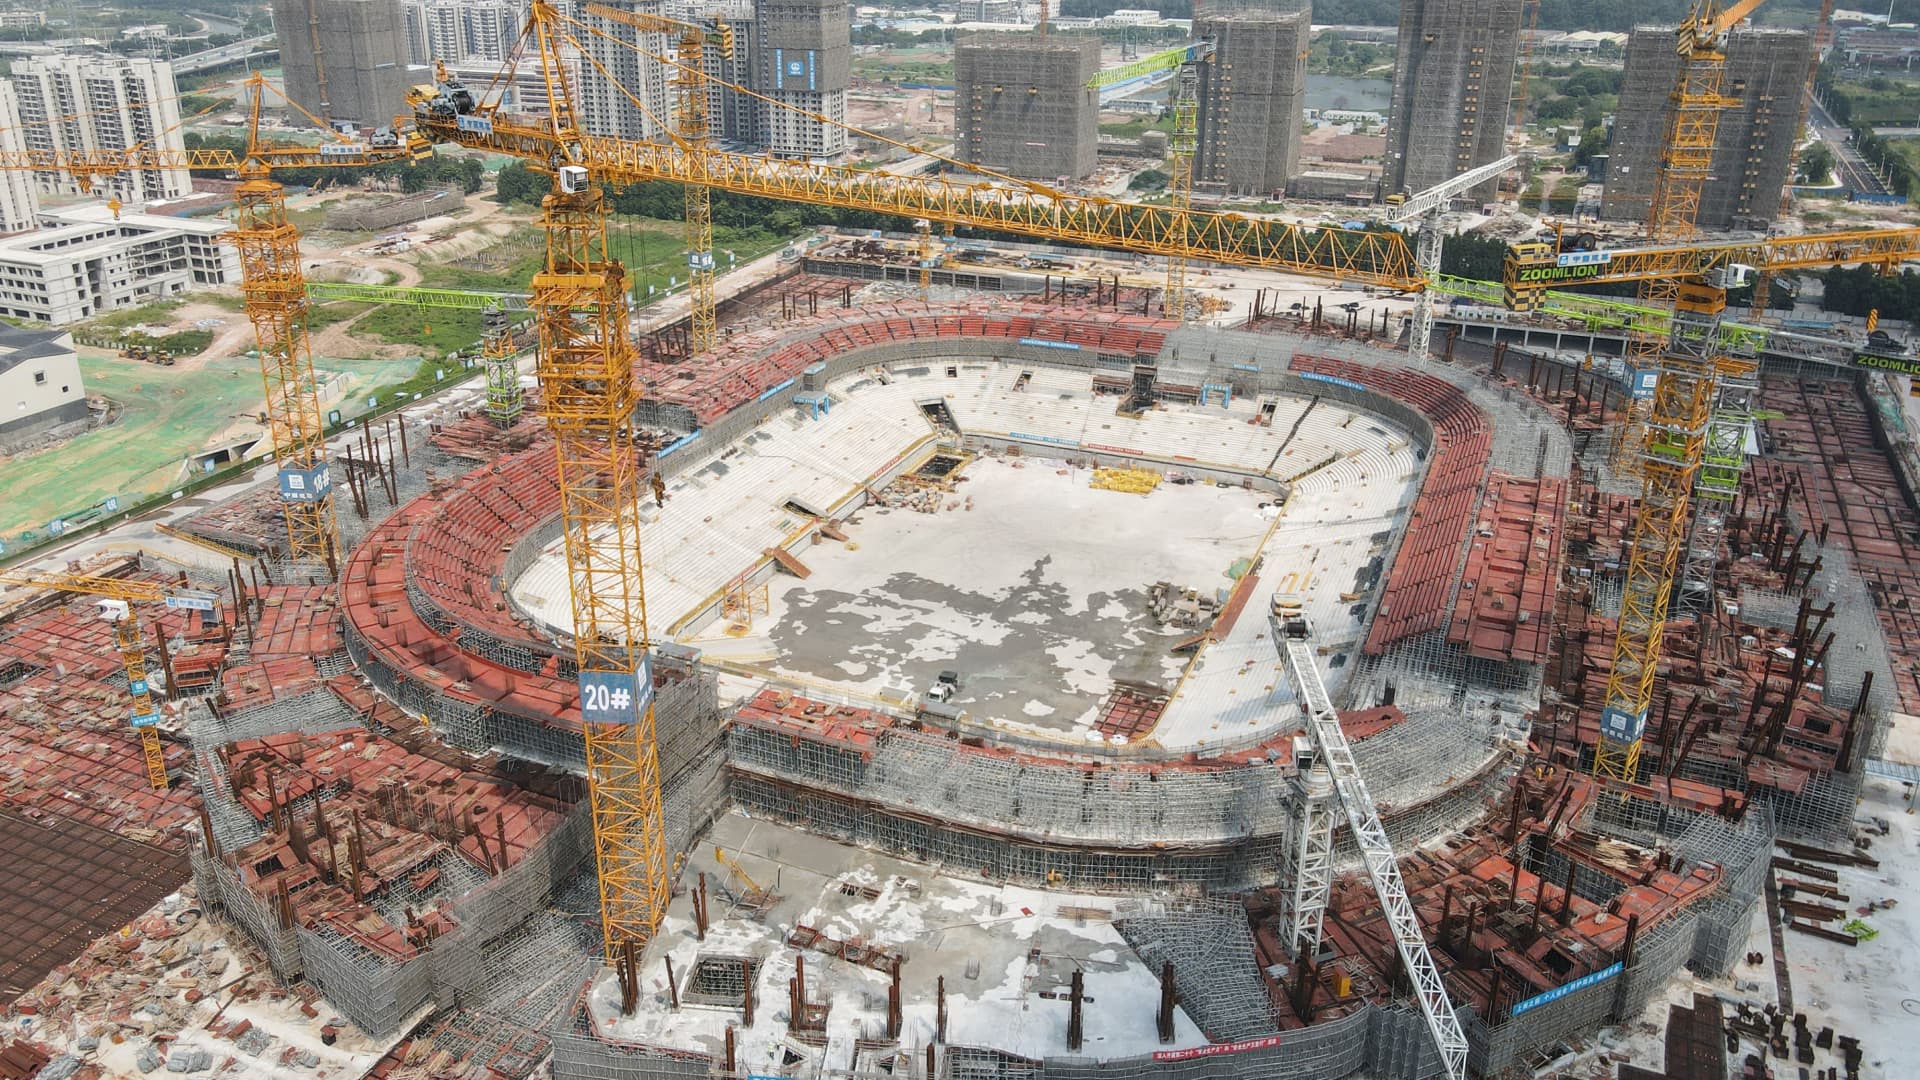 Guangzhou Evergrande Football Stadium under construction in Guangzhou, China's Guangdong province on Sep. 17, 2021